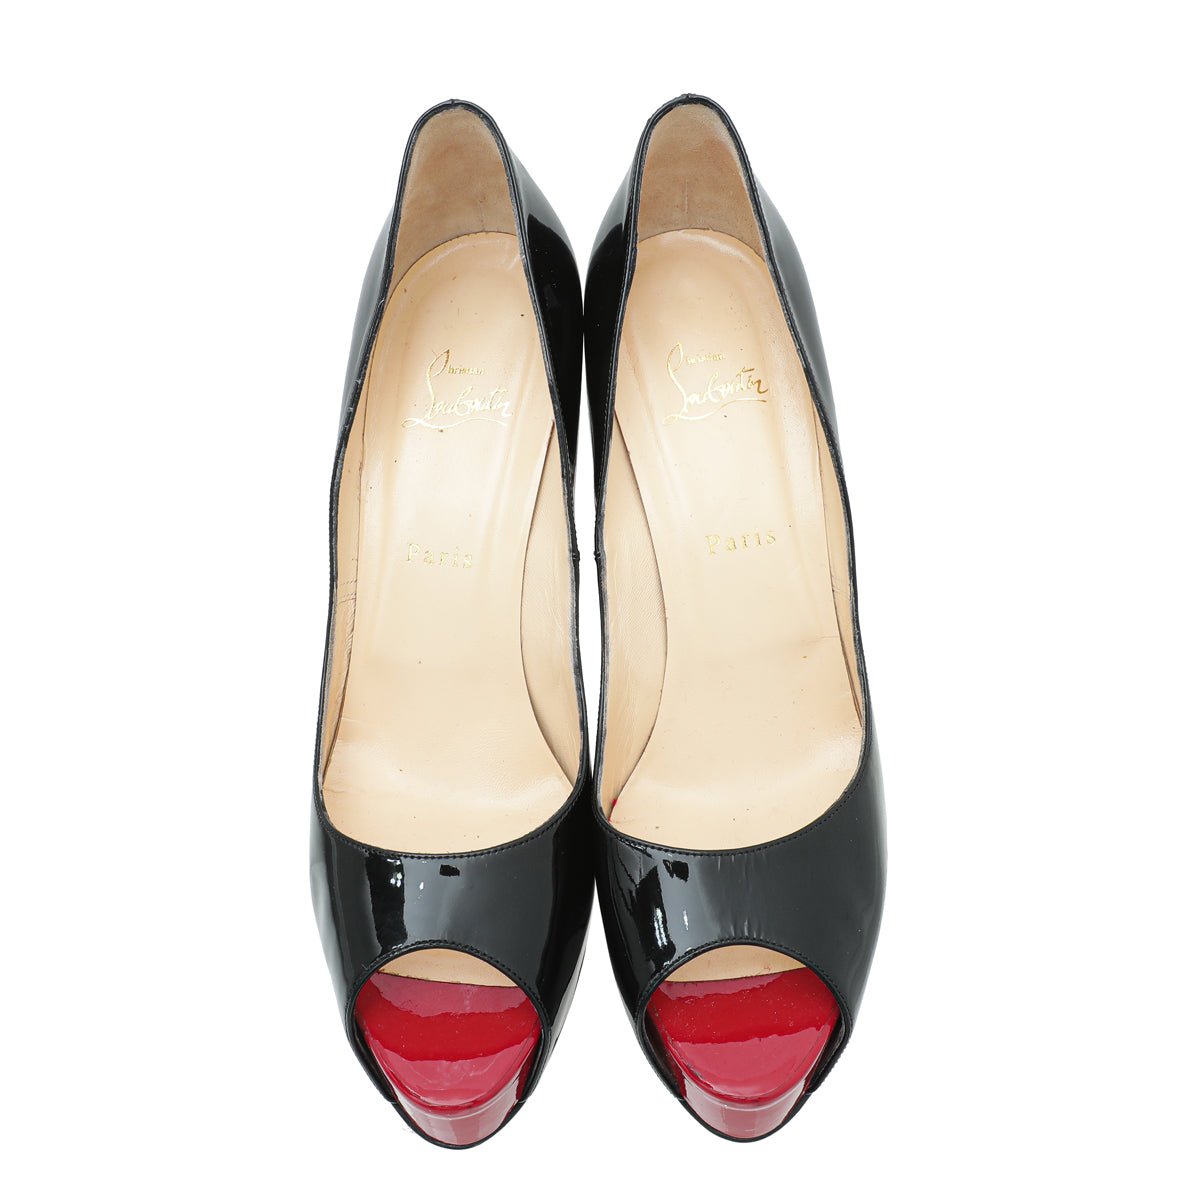 Load image into Gallery viewer, Christian Louboutin Black Very Prive Pump 41.5
